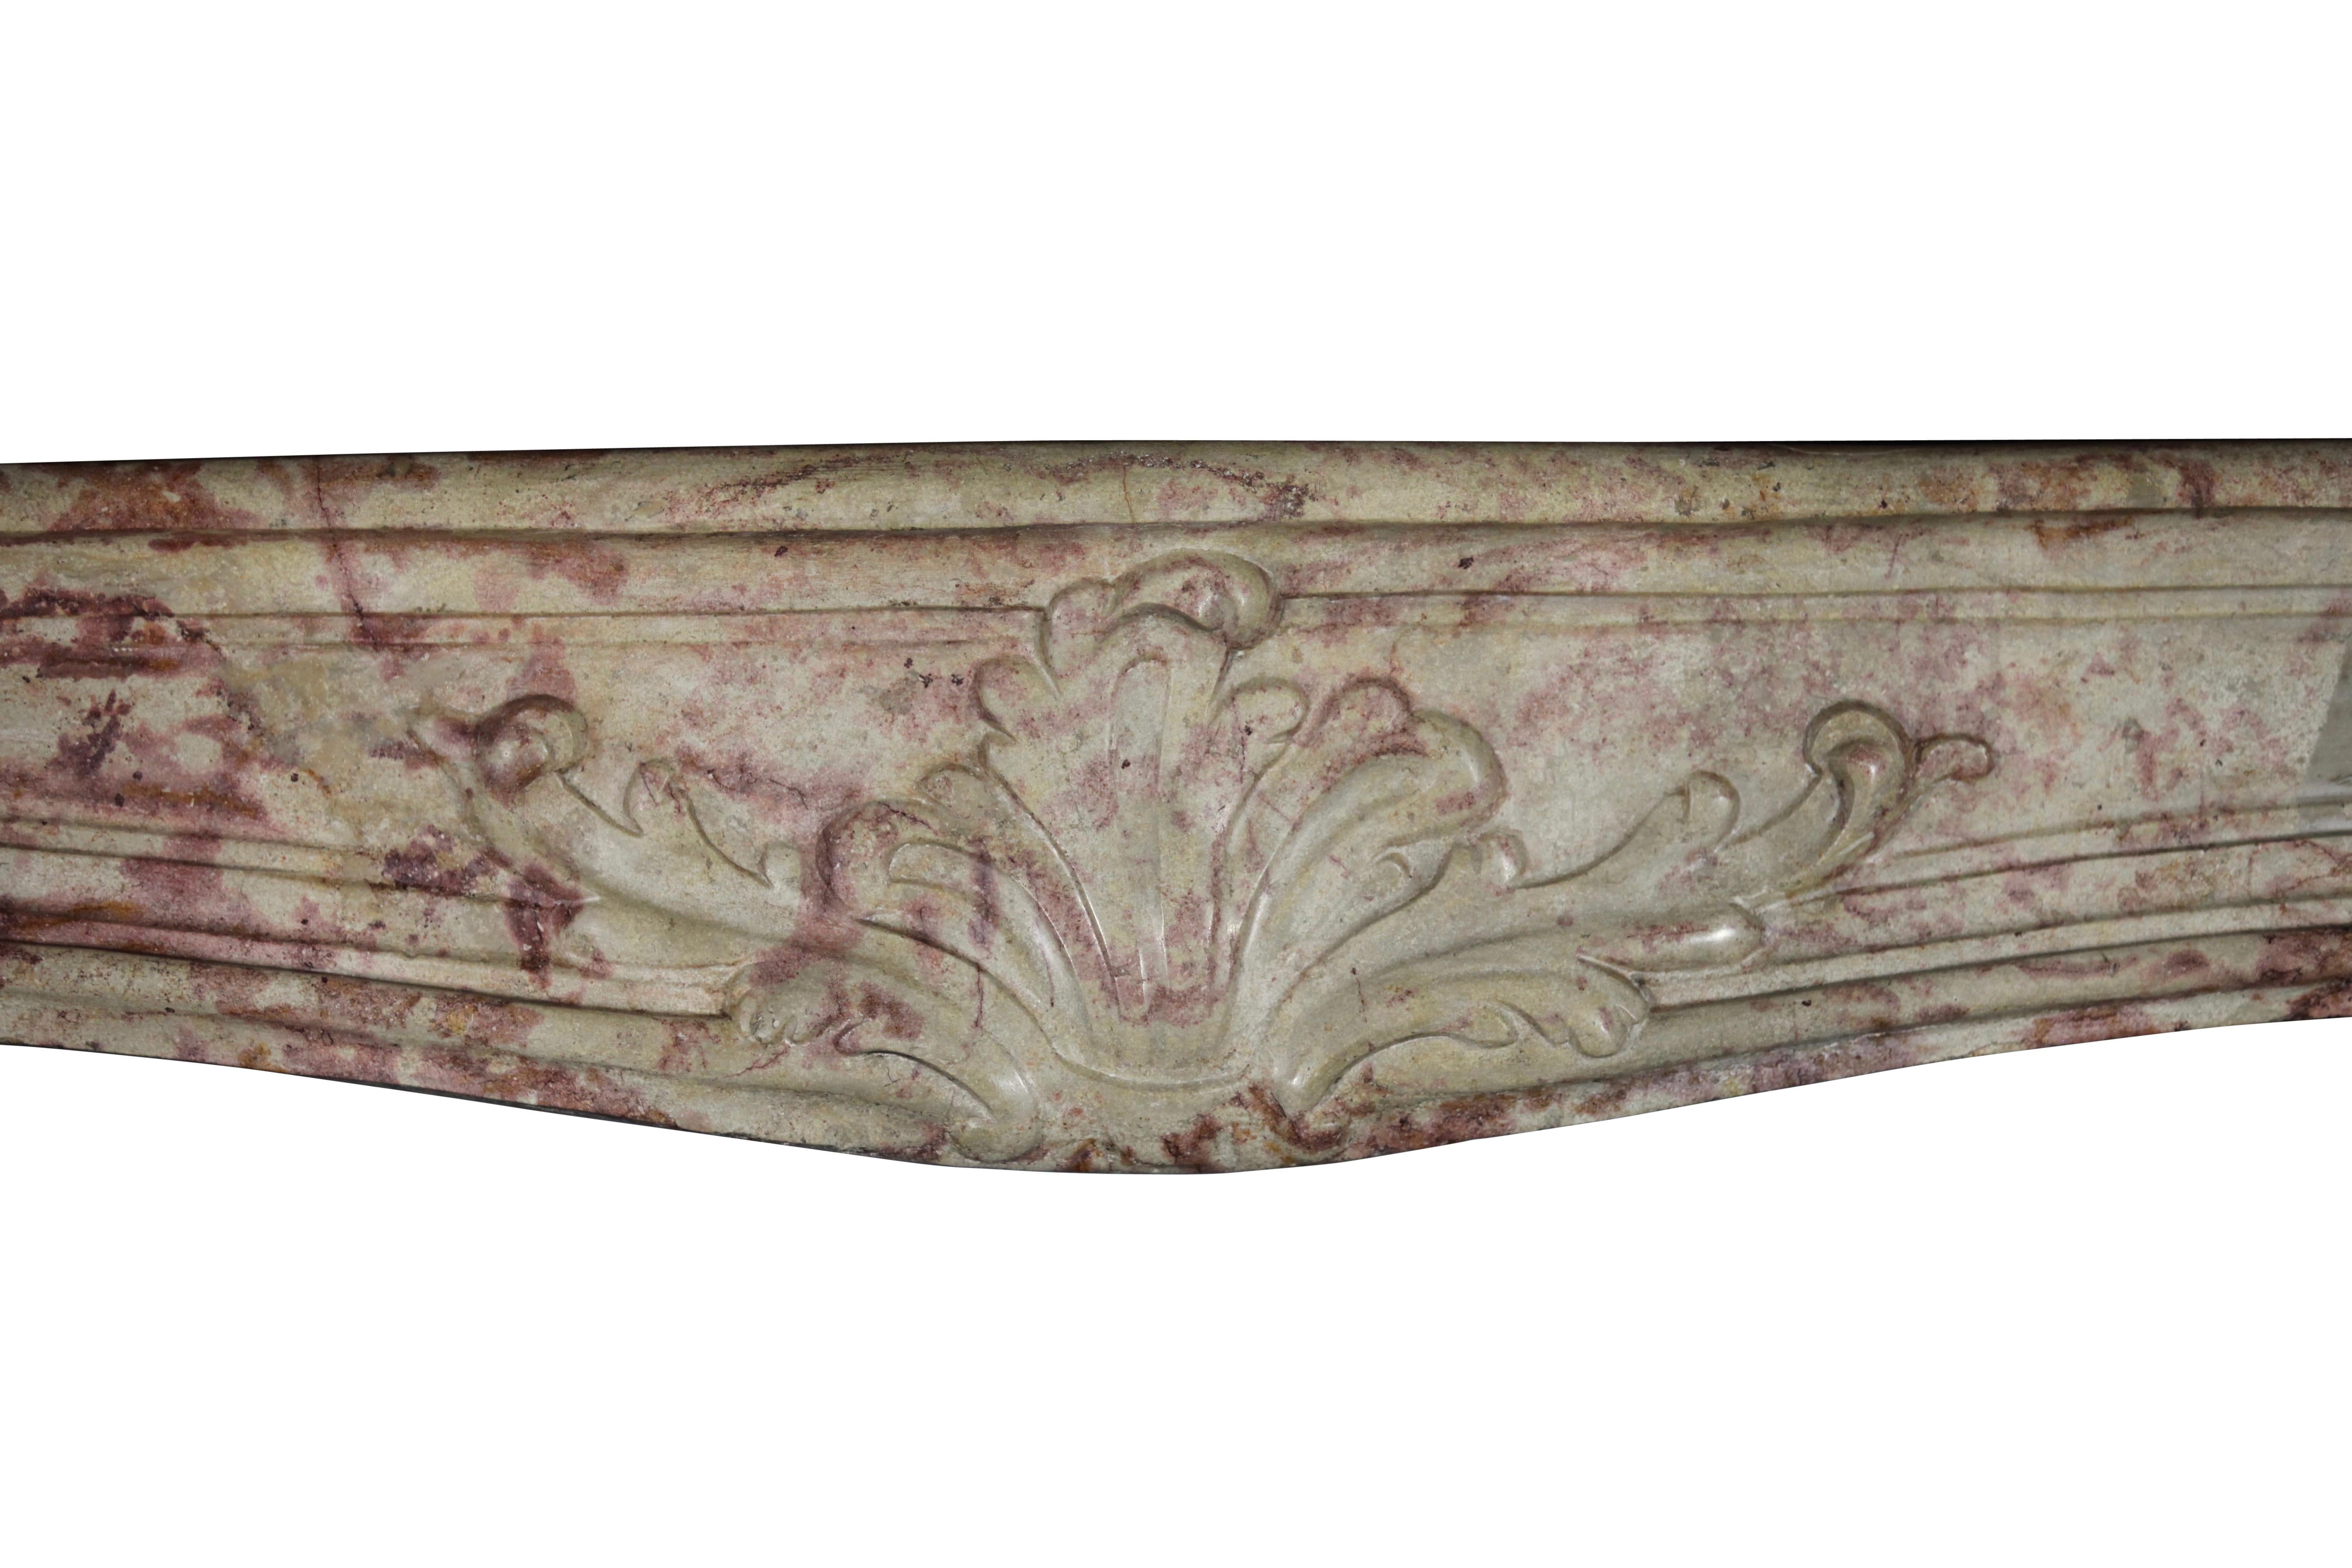 This original antique fireplace mantle in a pink-beige marble hard stone has unusual proportions. A perfect fit for a grand room. LXIV transition regency.
Measures:
197 cm EW 77,55